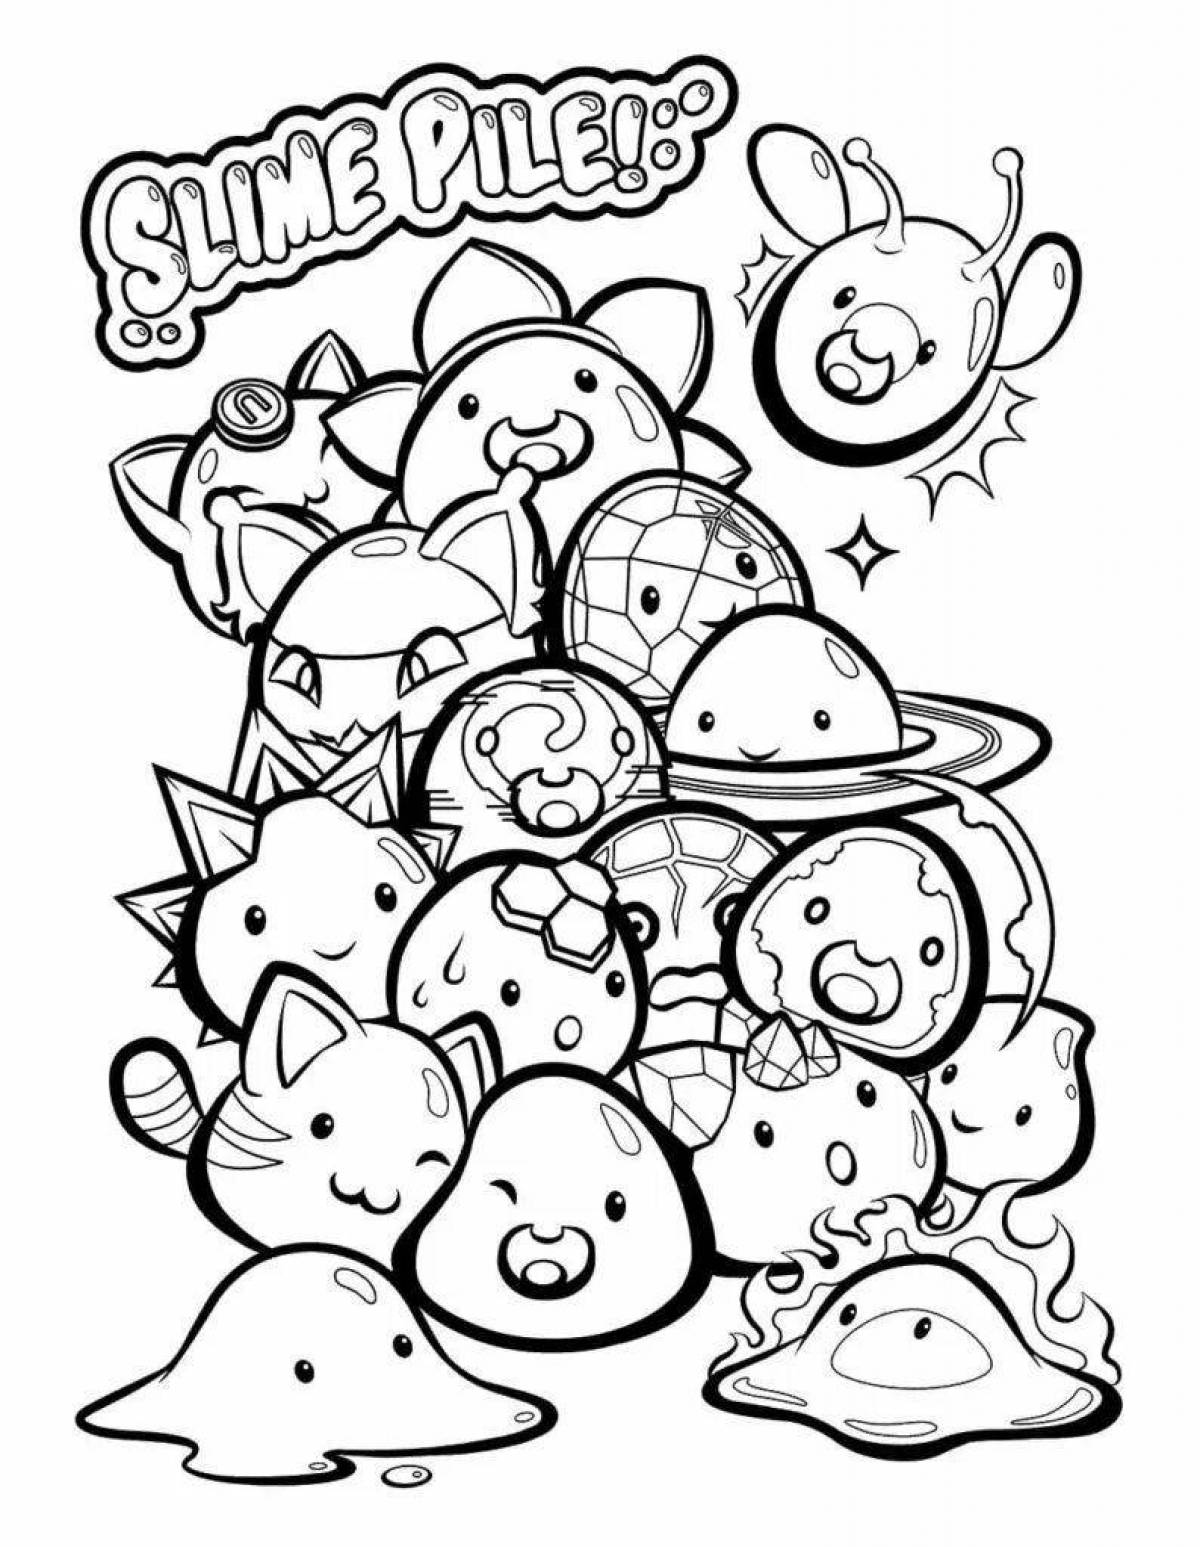 Color-radiant slime coloring page for children